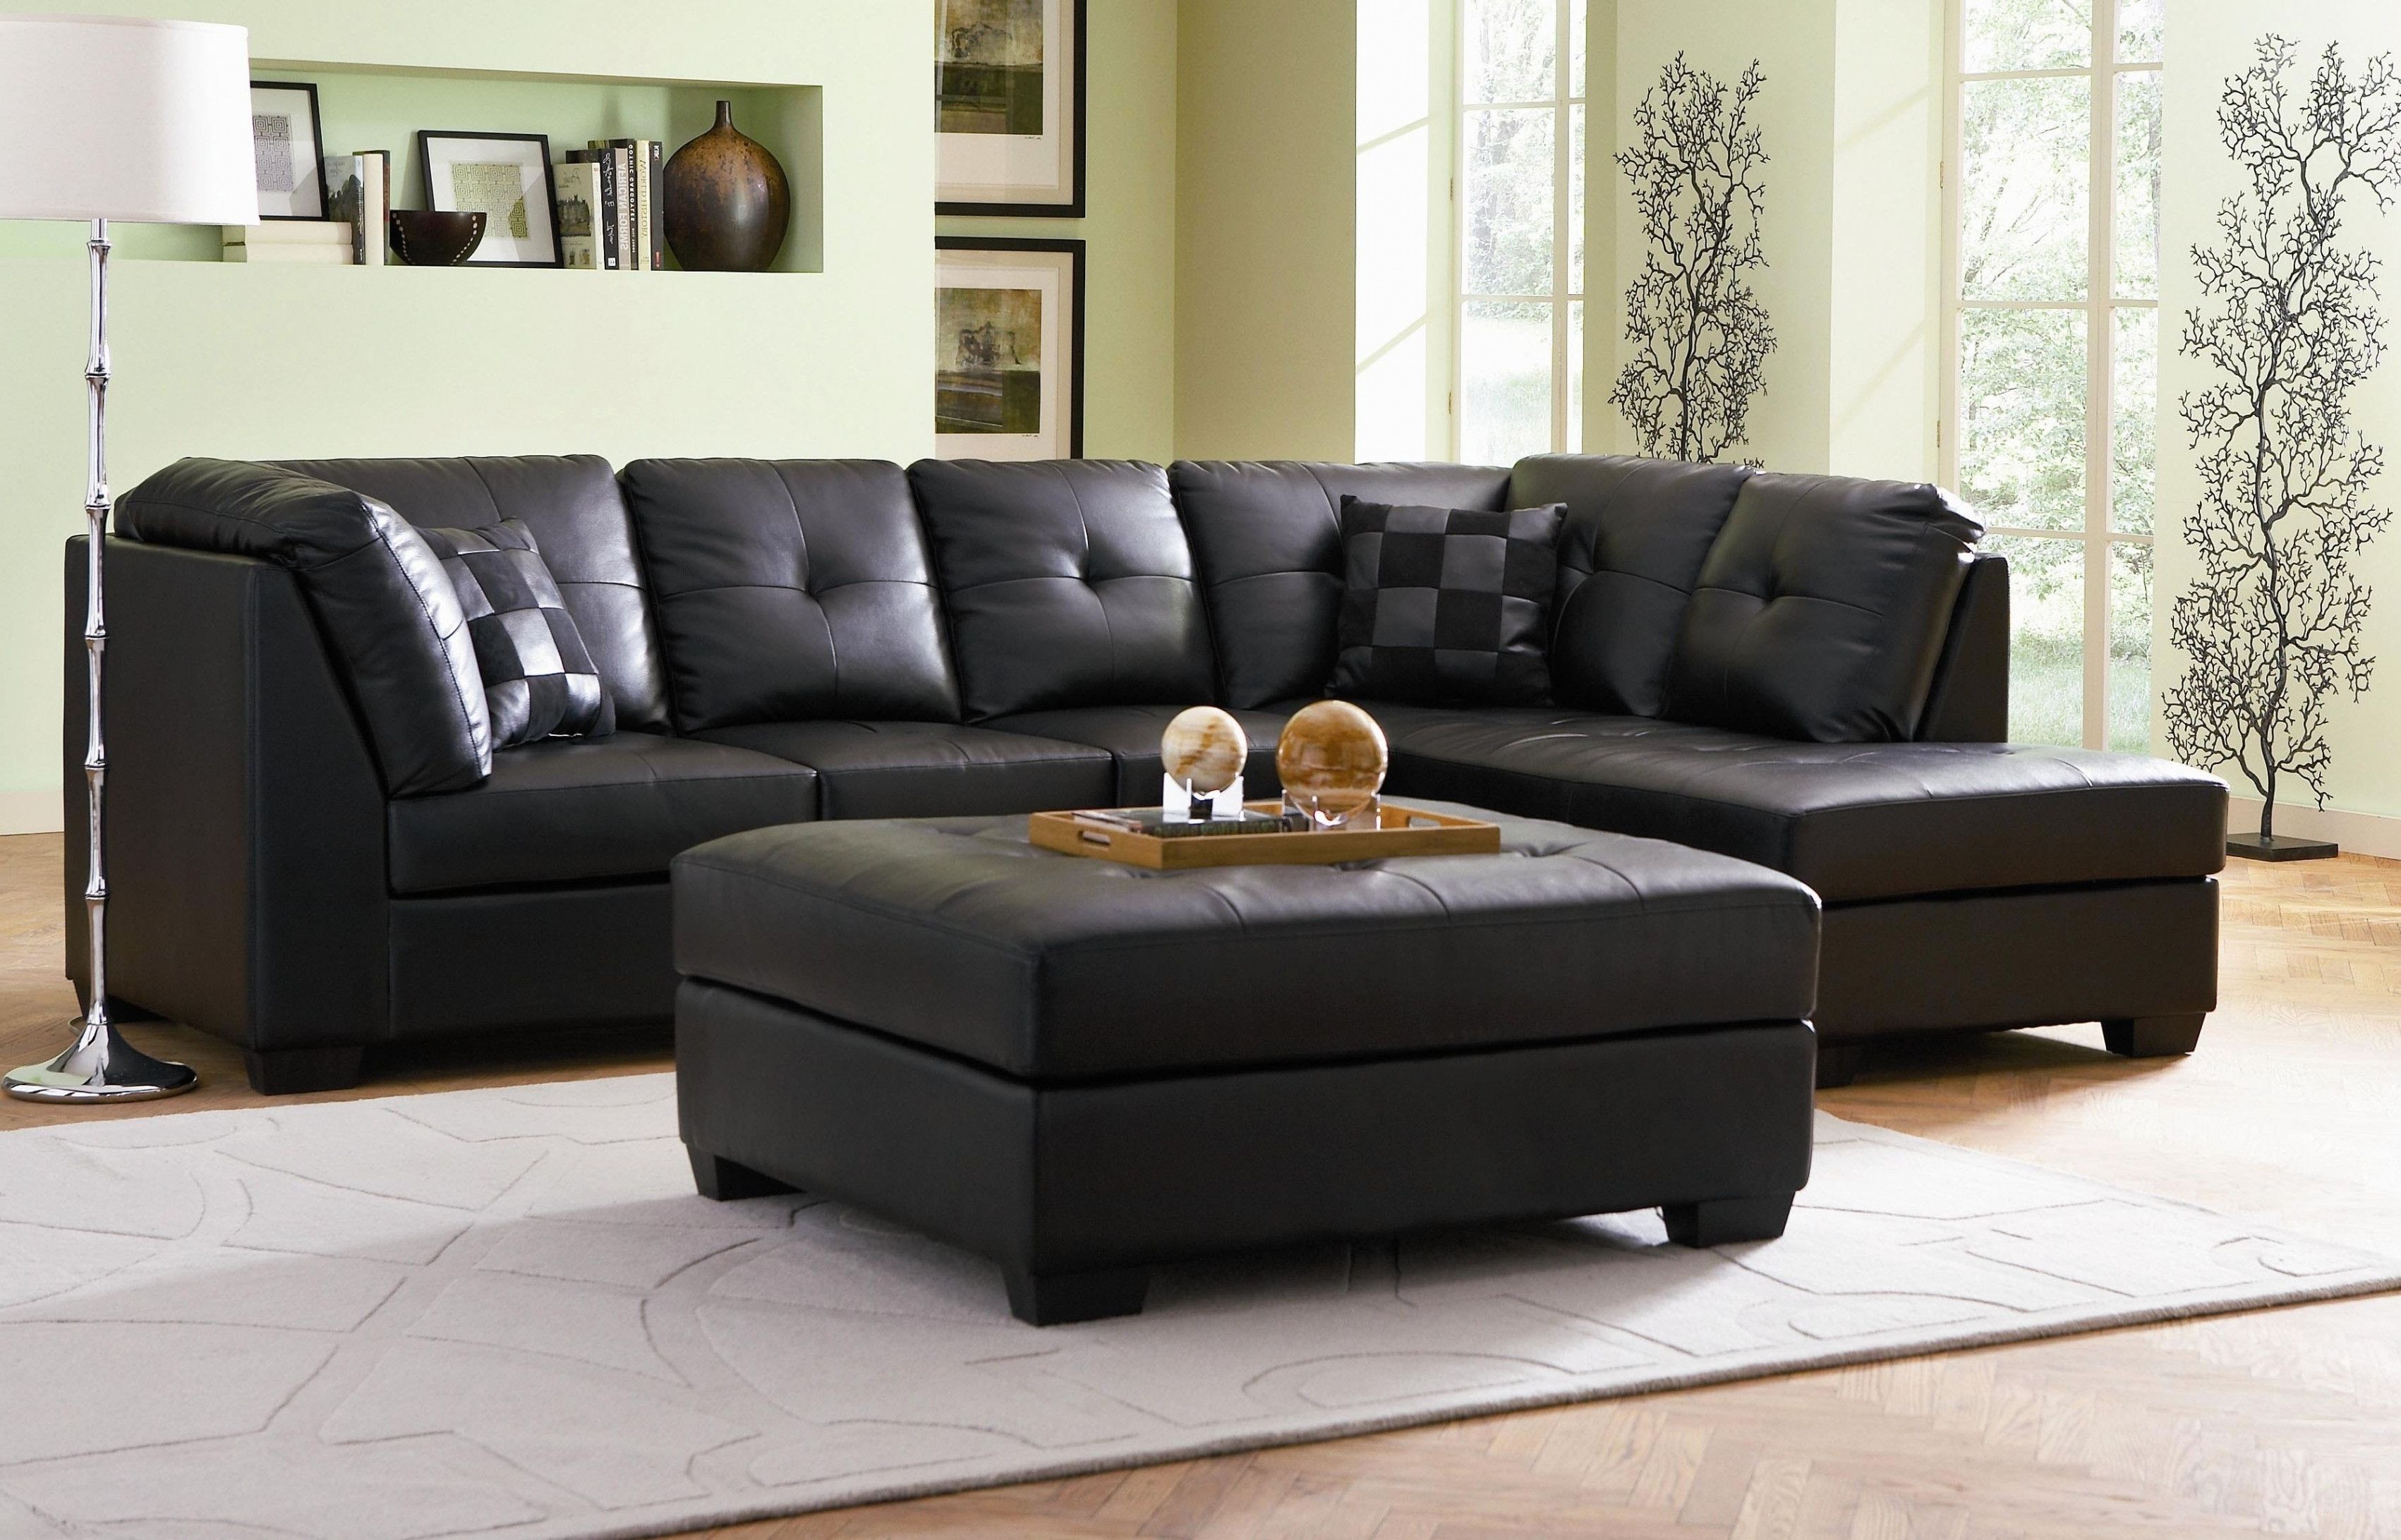 Furniture : Magnificent Couch Under 200 Best Of Sofa Elegant Within Sectional Sofas Under 200 (Photo 1 of 10)